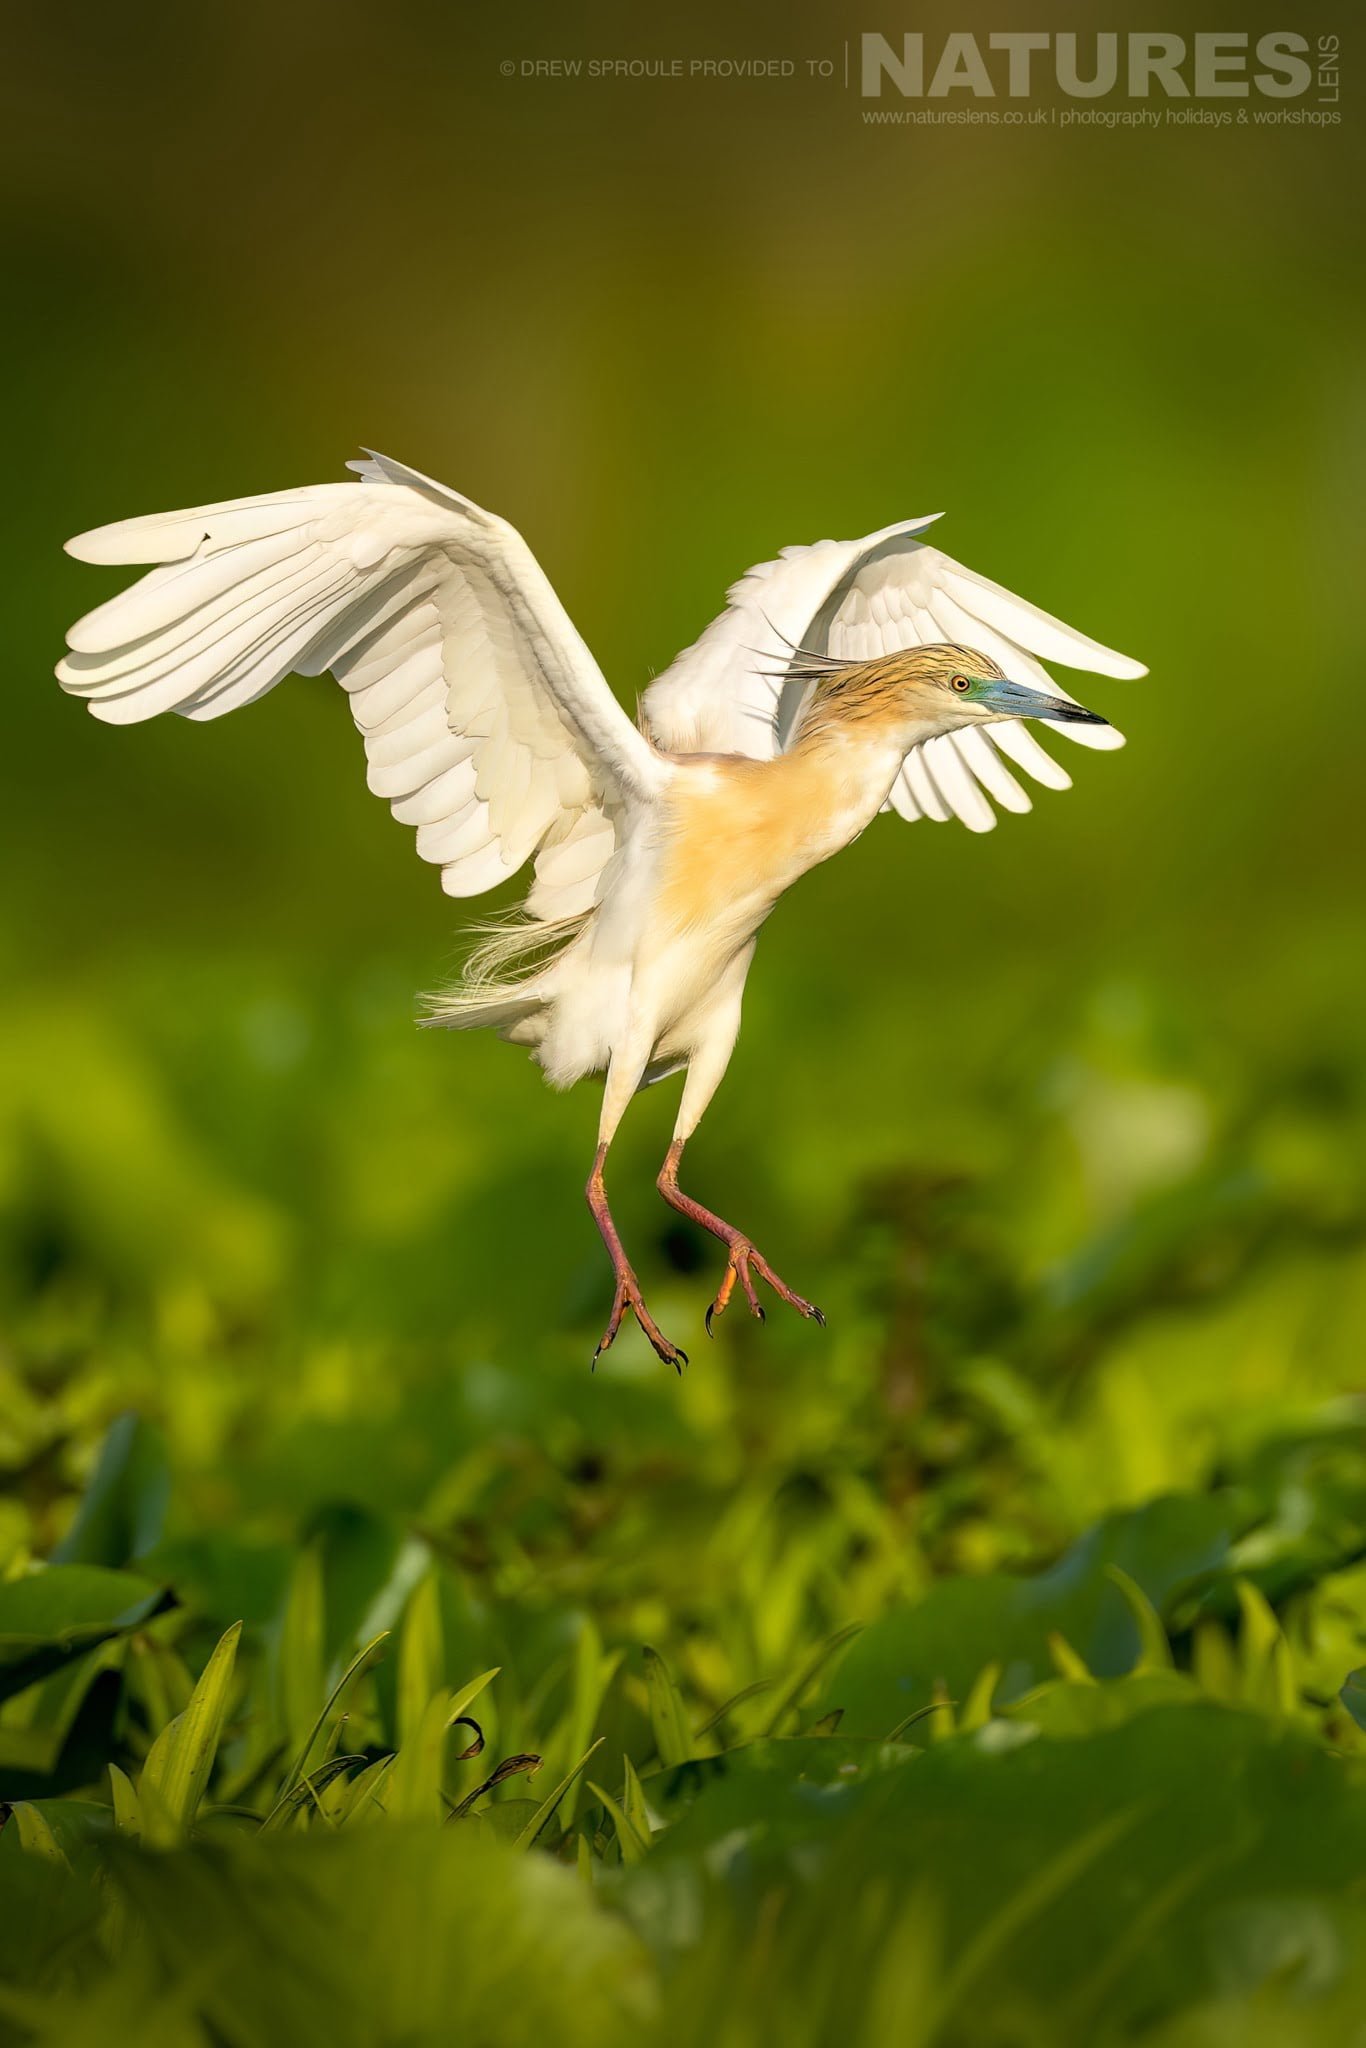 A Beautiful Squacco Heron In Flight Typical Of The Kind Of Image You Will Capture During The Birdlife Of The Danube Delta Photography Trip